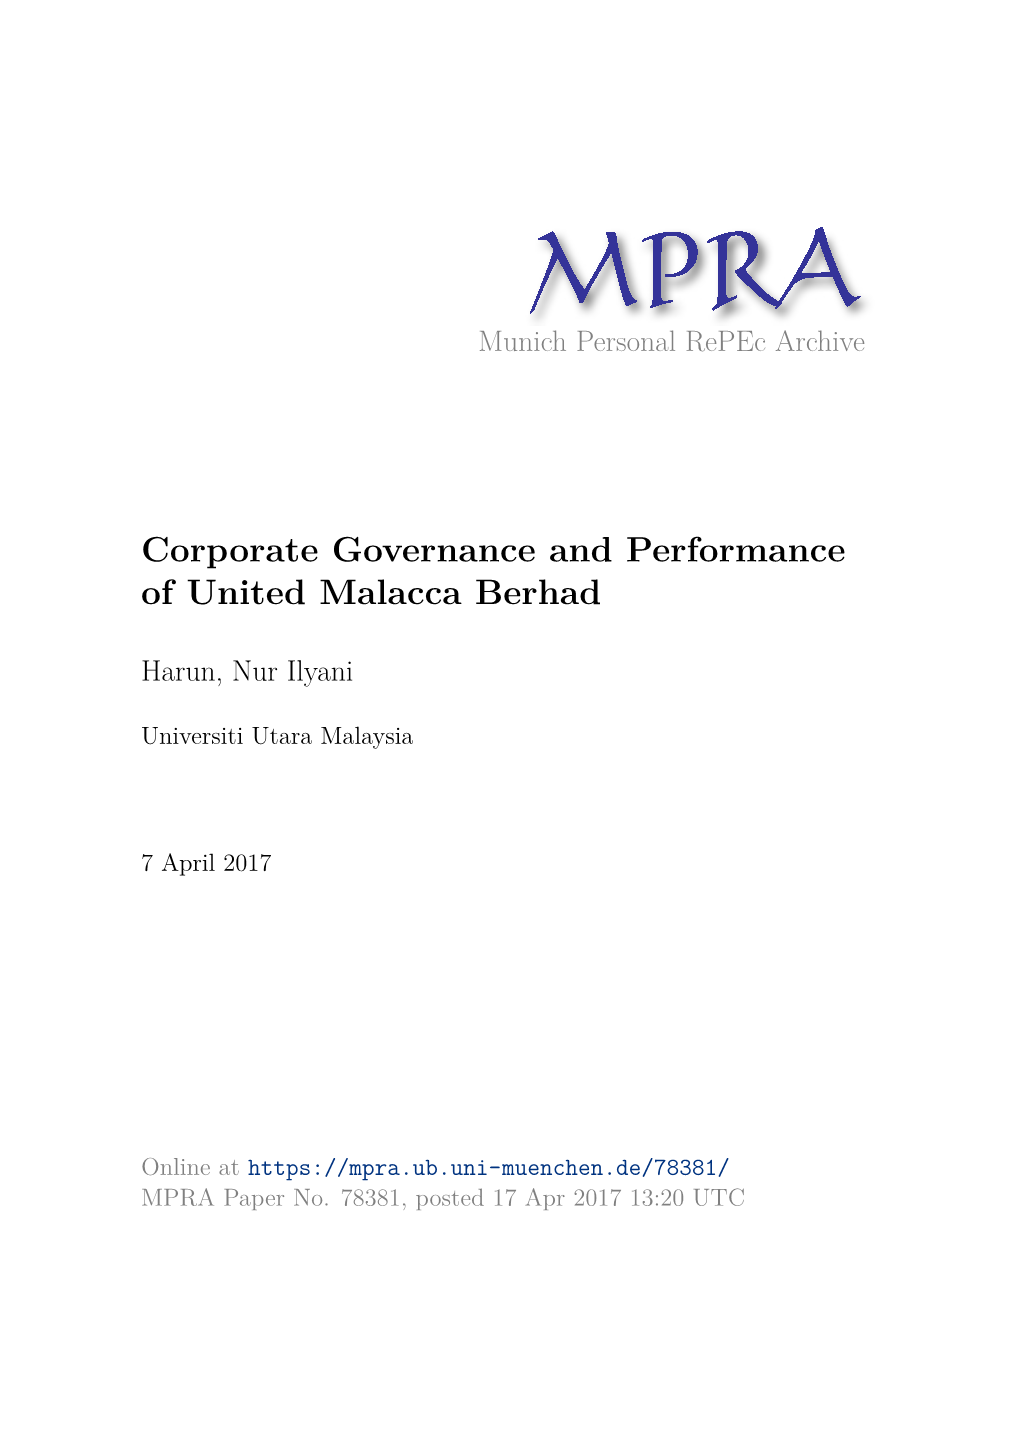 Corporate Governance and Performance of United Malacca Berhad